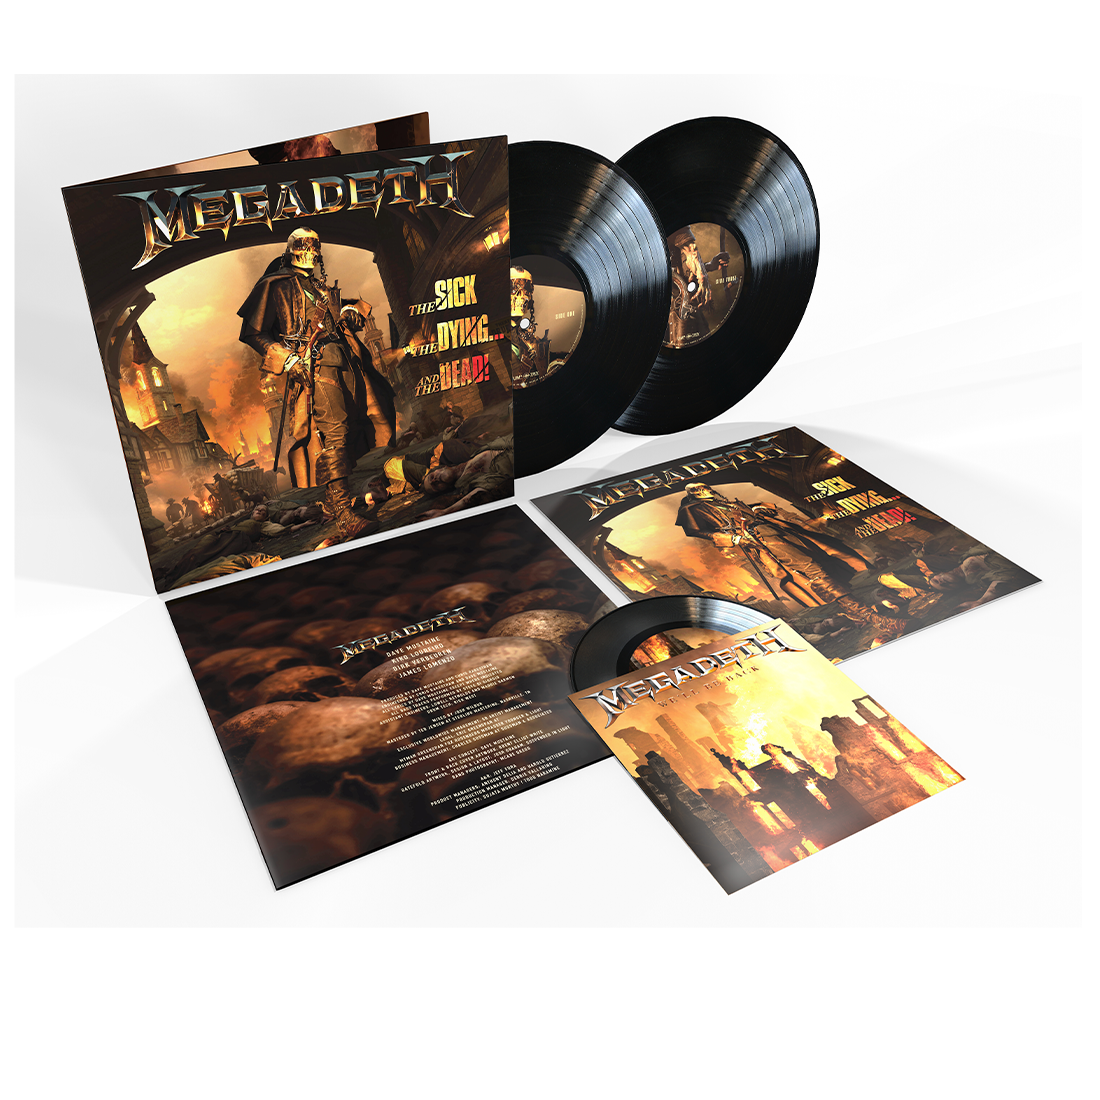 Megadeth - The Sick, The Dying… And The Dead!: Exclusive Vinyl 2LP + 7" Single